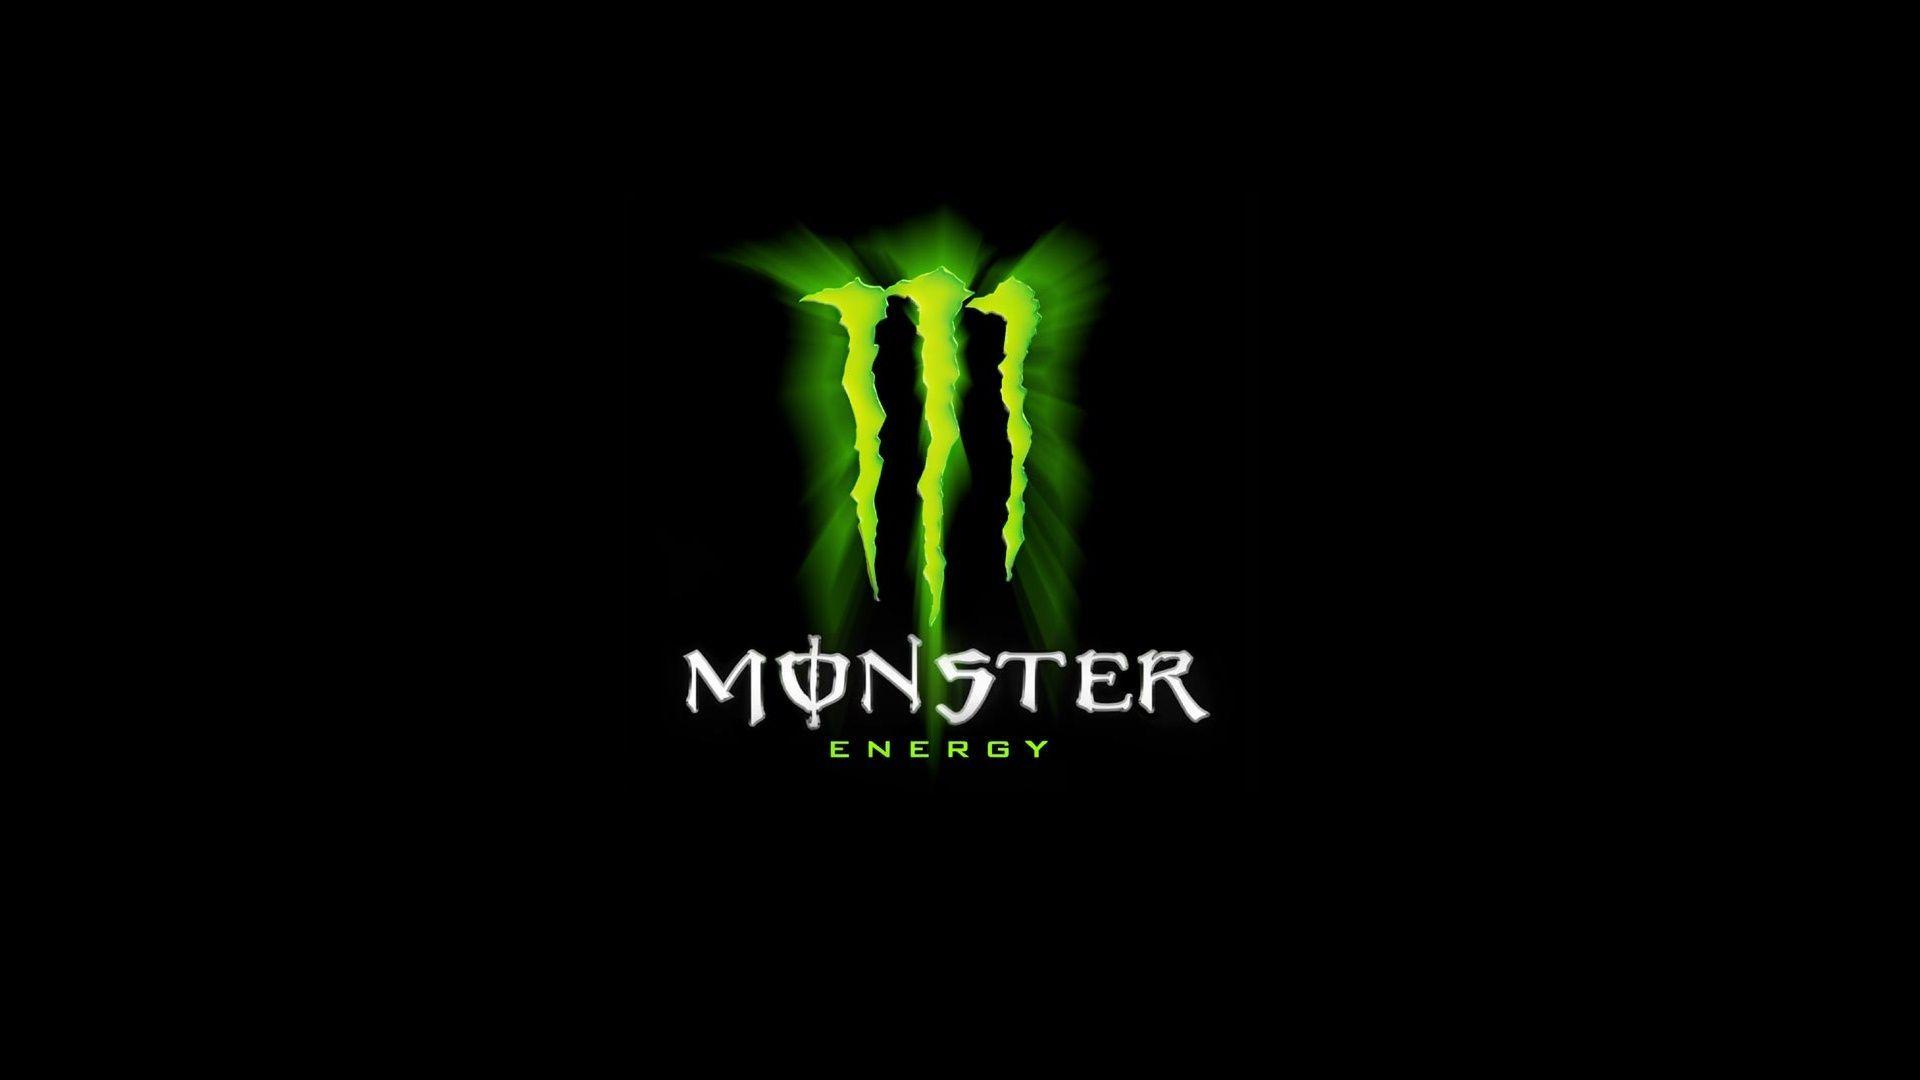 Monster energy Wallpapers Download | MobCup